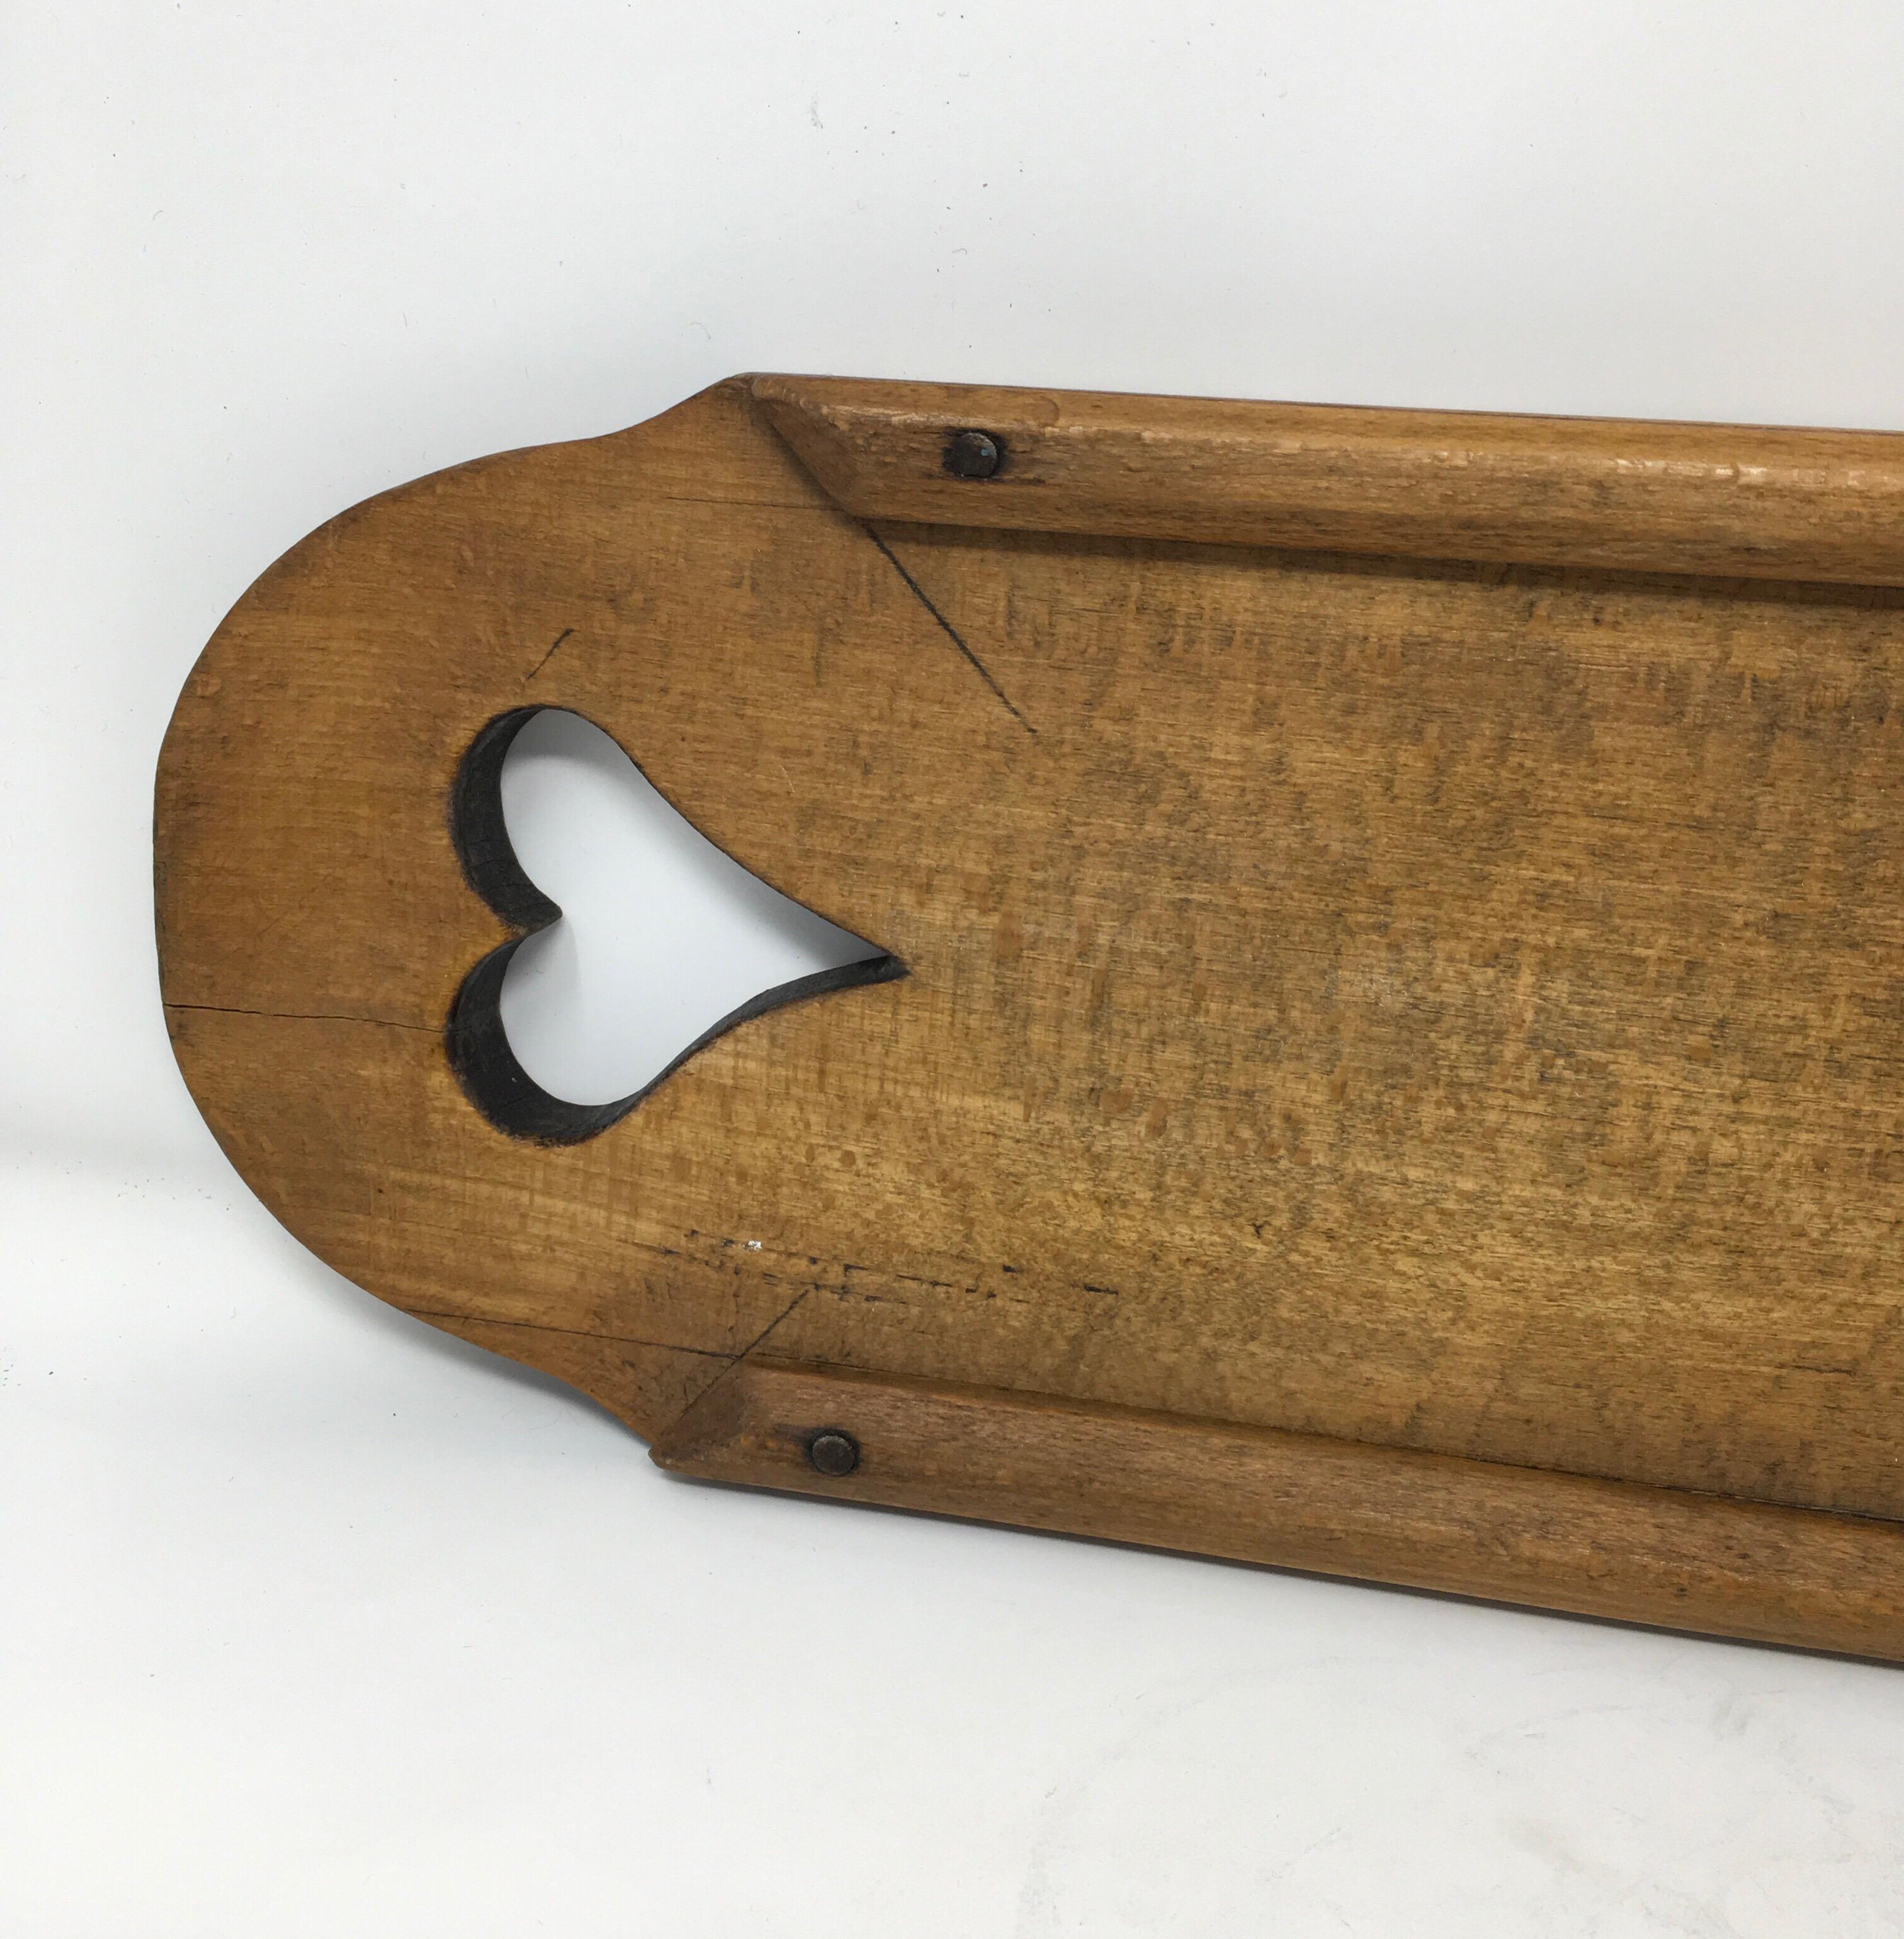 Antique French Mandoline. This vintage Mandoline is fitted with a julienne slicer. Charming rustic farmhouse decor. 
 